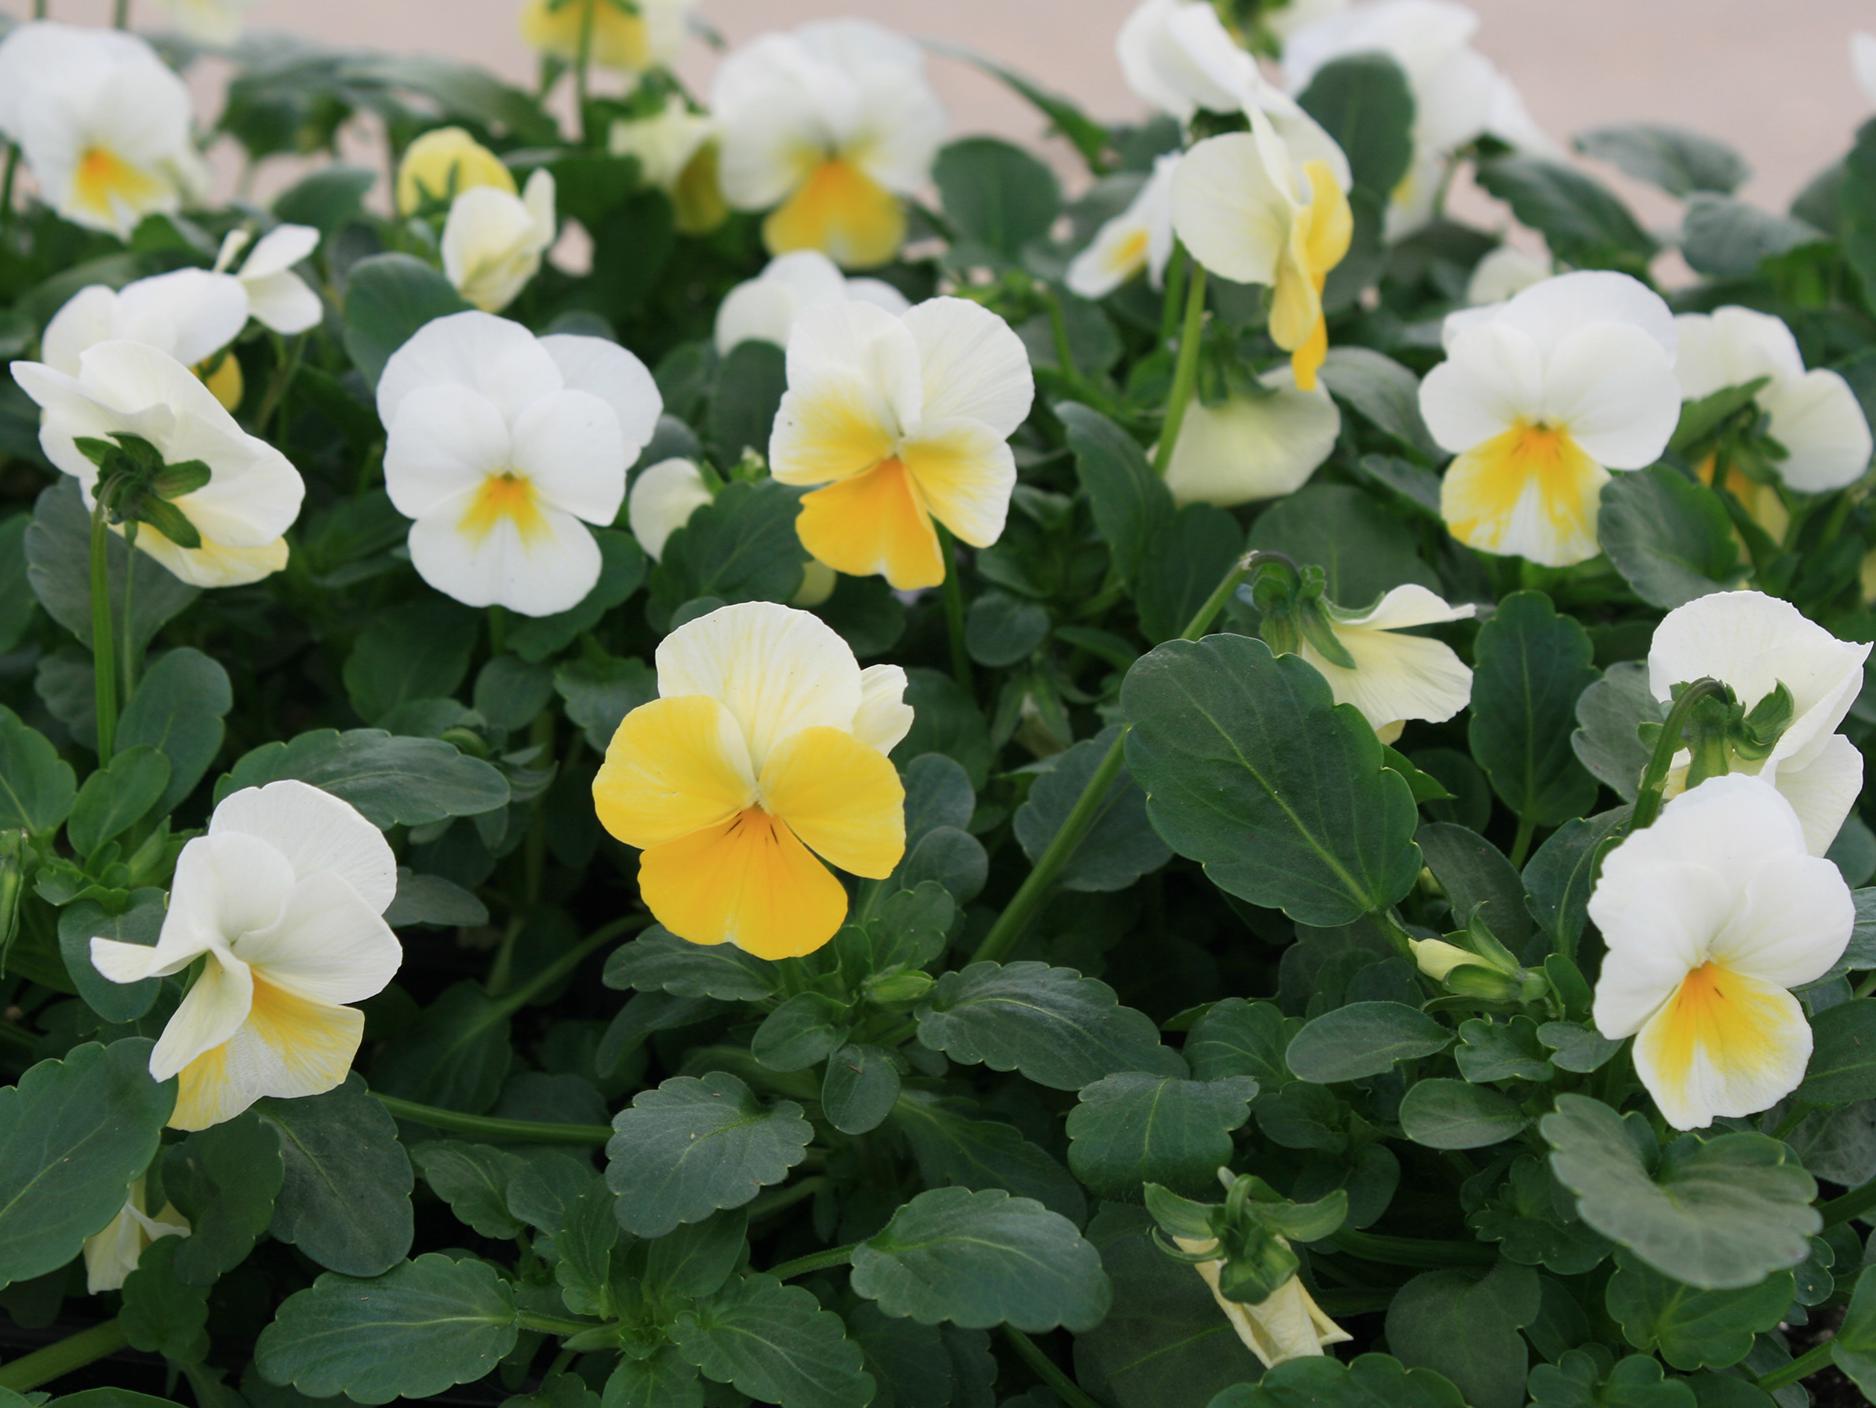 Several white flowers have a lower petal of yellow and rise above a sea of green foliage.